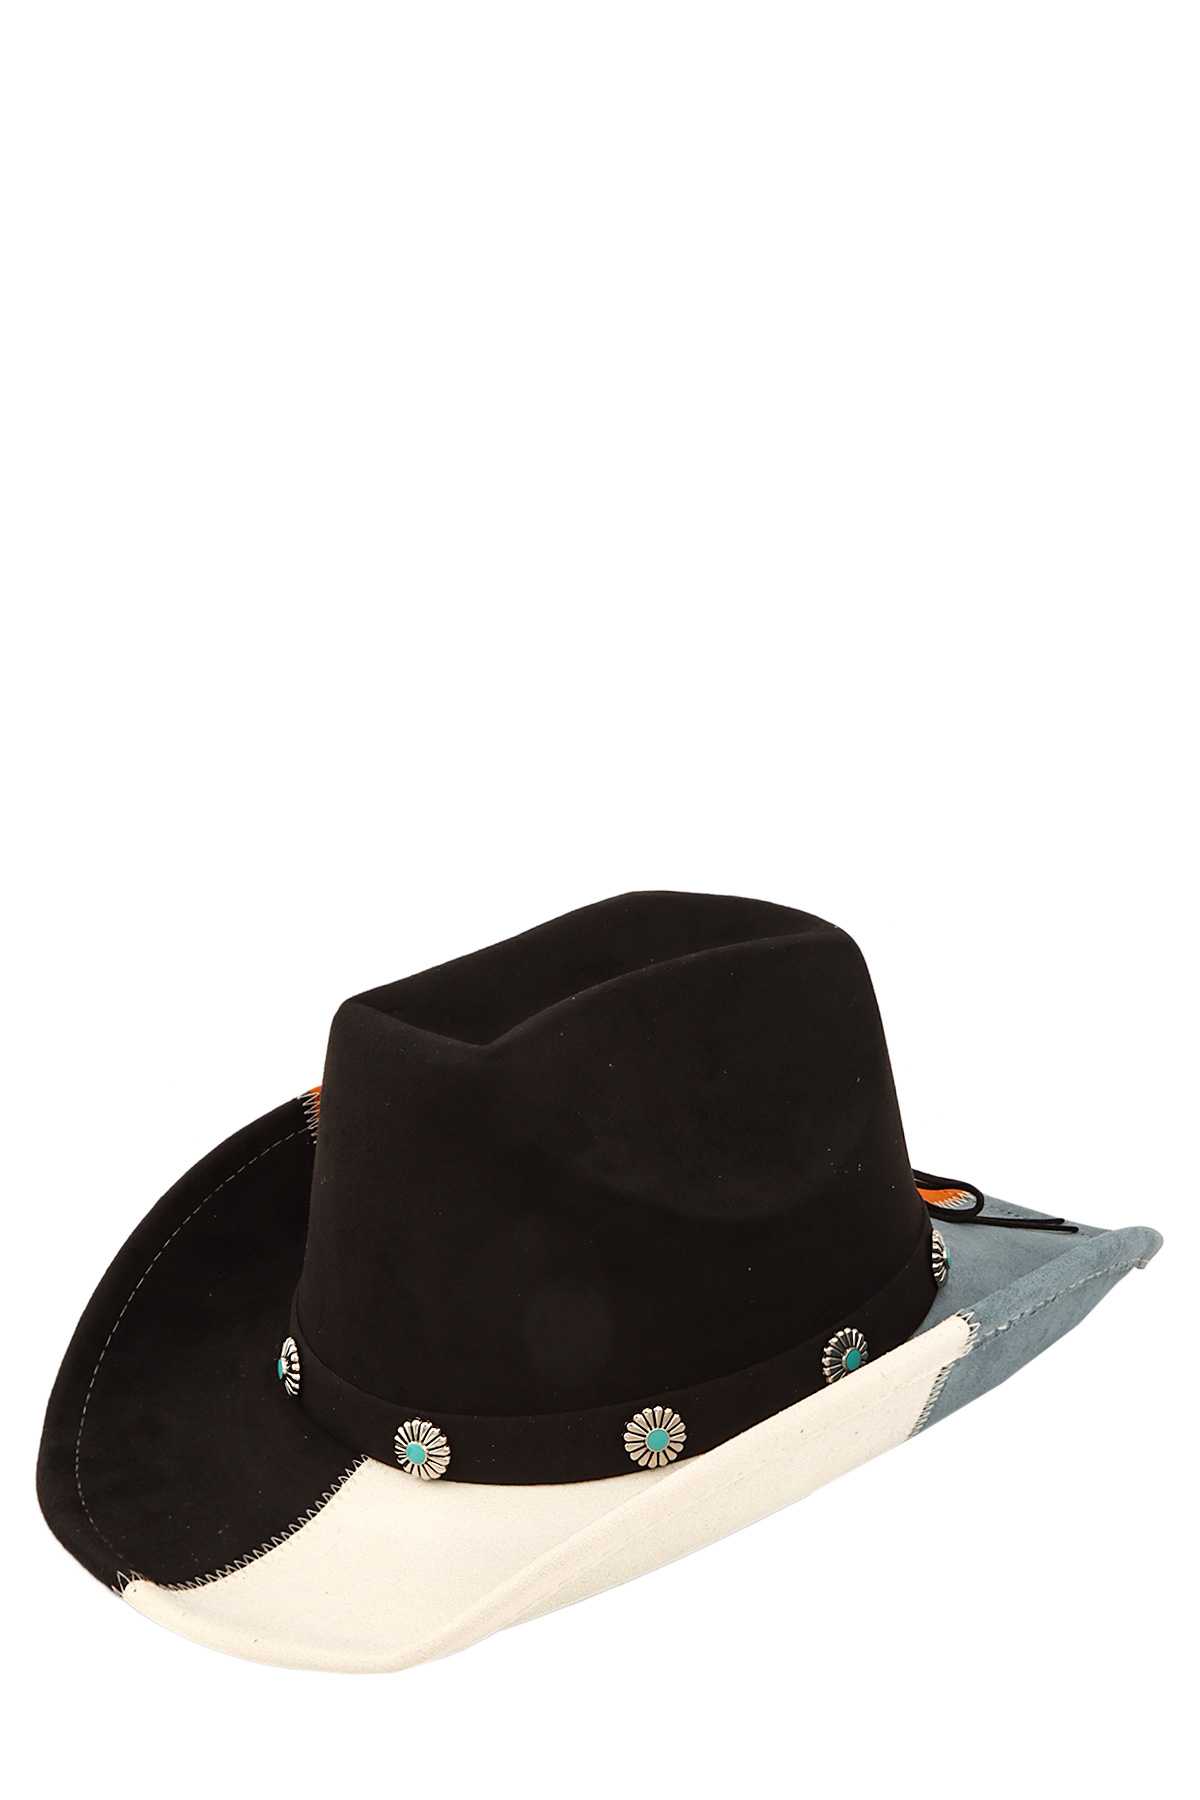 Four Color and Flower Suede Cowboy hat